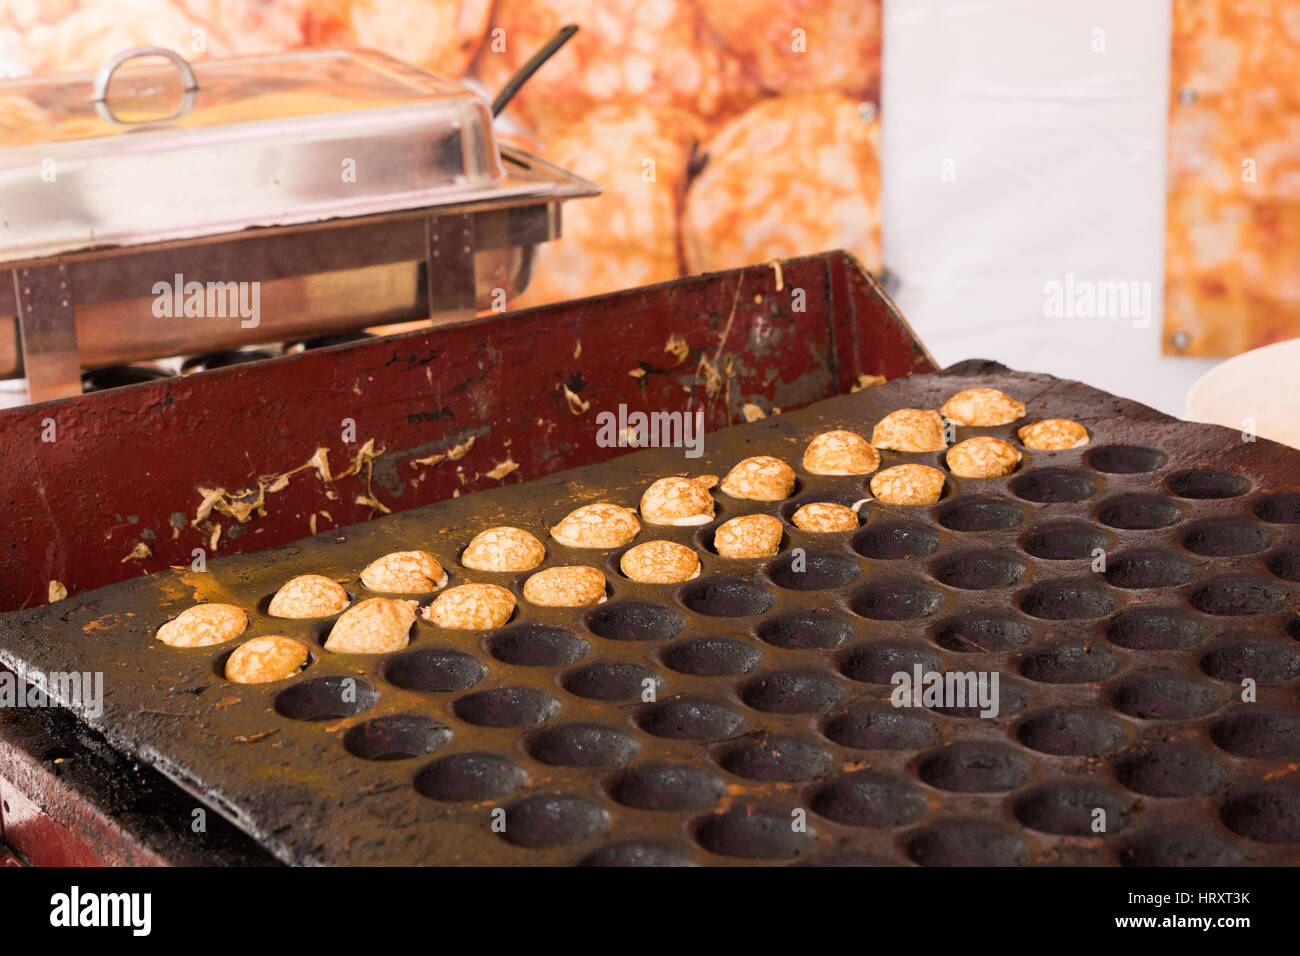 Poffertjes being cooked and sold in a roadside stall in Amsterdam, The Netherlands Stock Photo